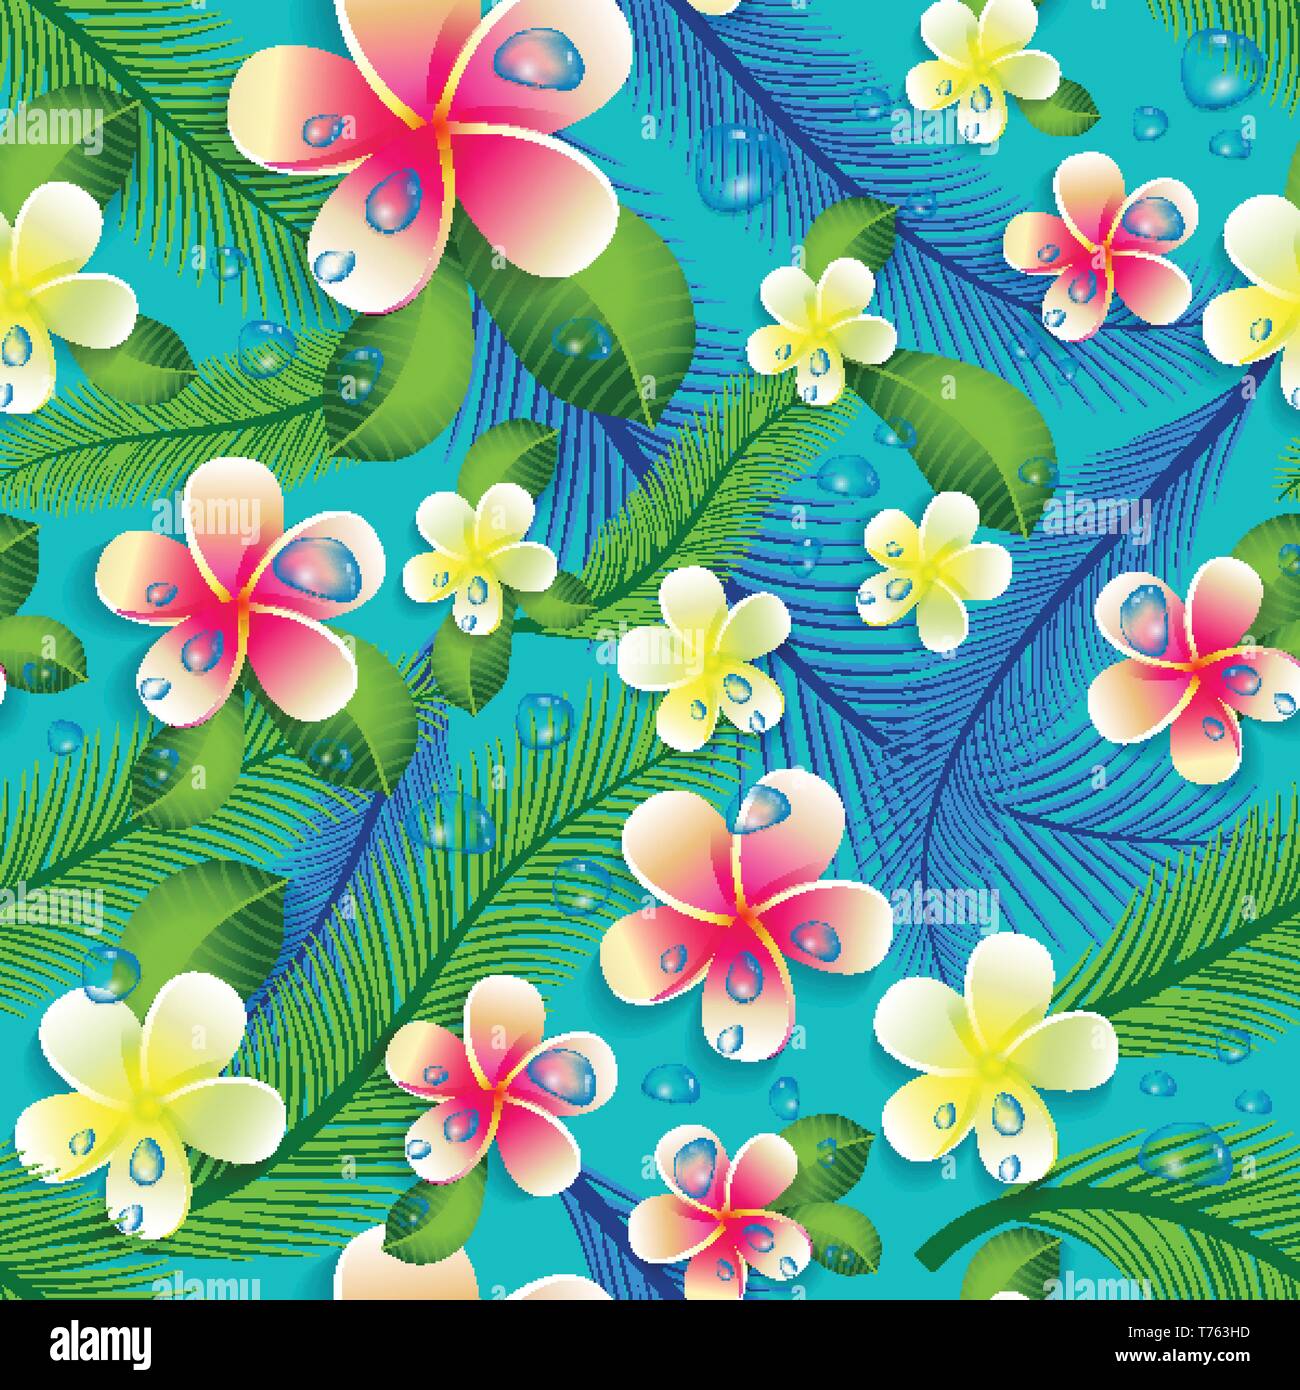 Beautiful seamless floral jungle pattern background. Tropical flowers and leaves. Stock Vector